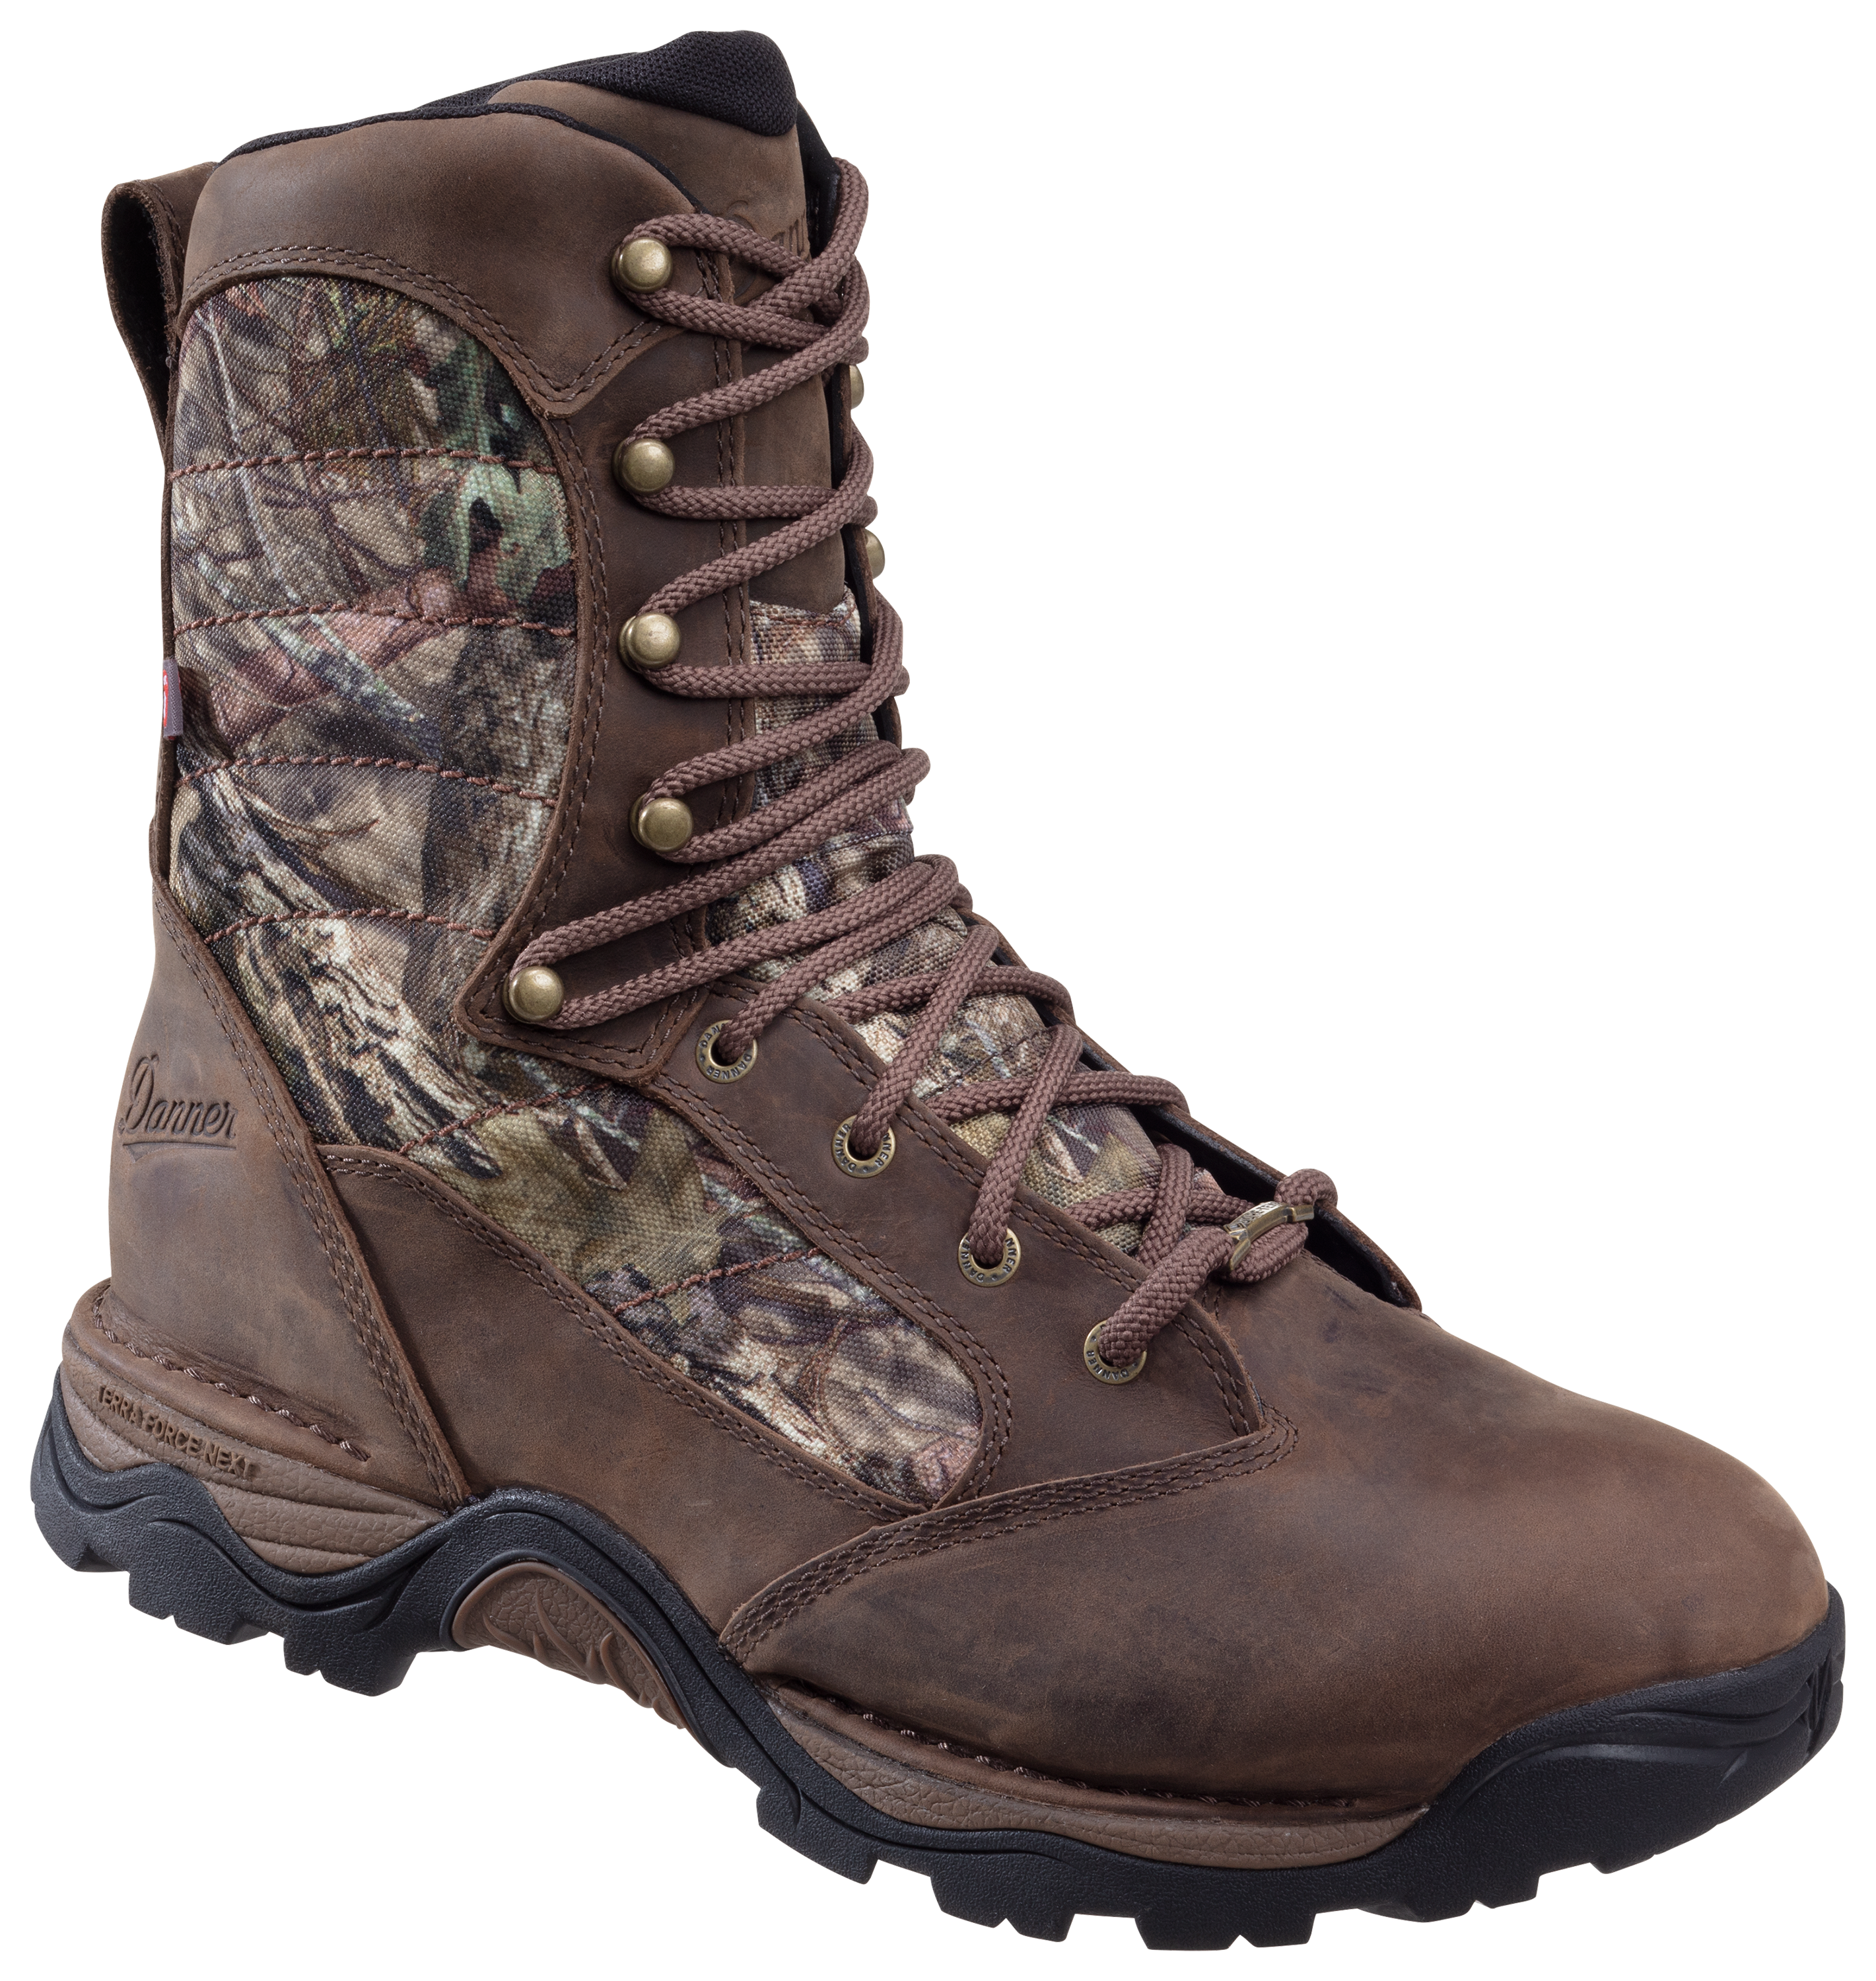 Danner Pronghorn 800 Insulated GORE-TEX Hunting Boots for Men - Mossy Oak Break-Up Country - 8.5M